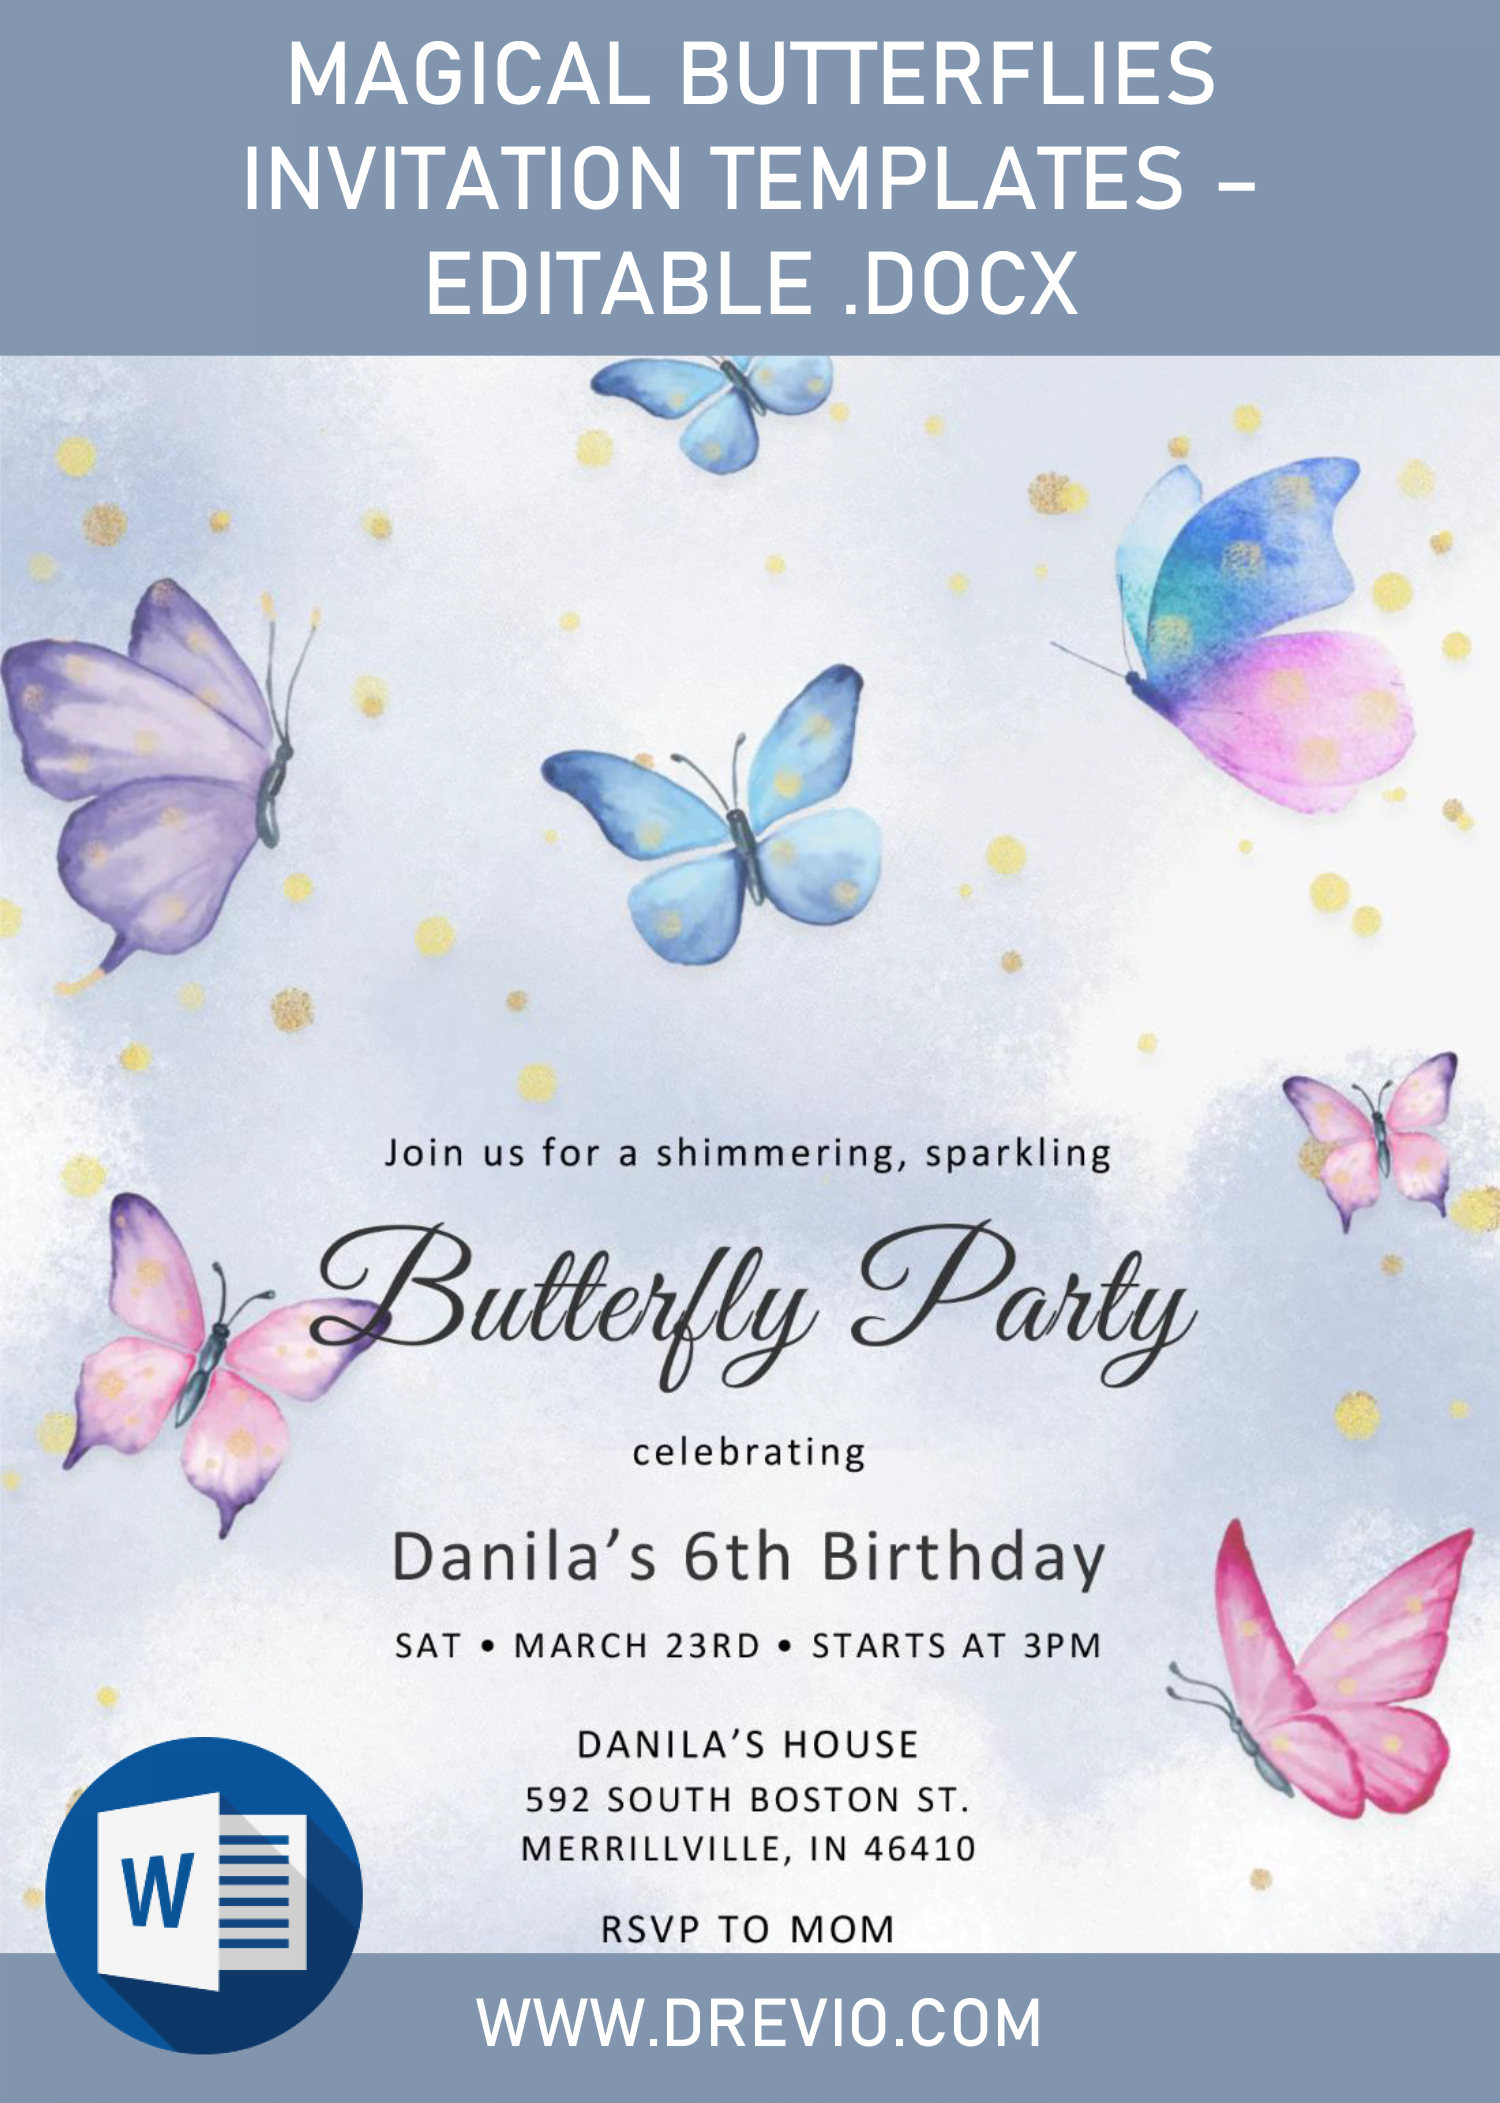 Magical Butterflies Invitation Templates Editable Docx Download Hundreds Free Printable Birthday Invitation Templates